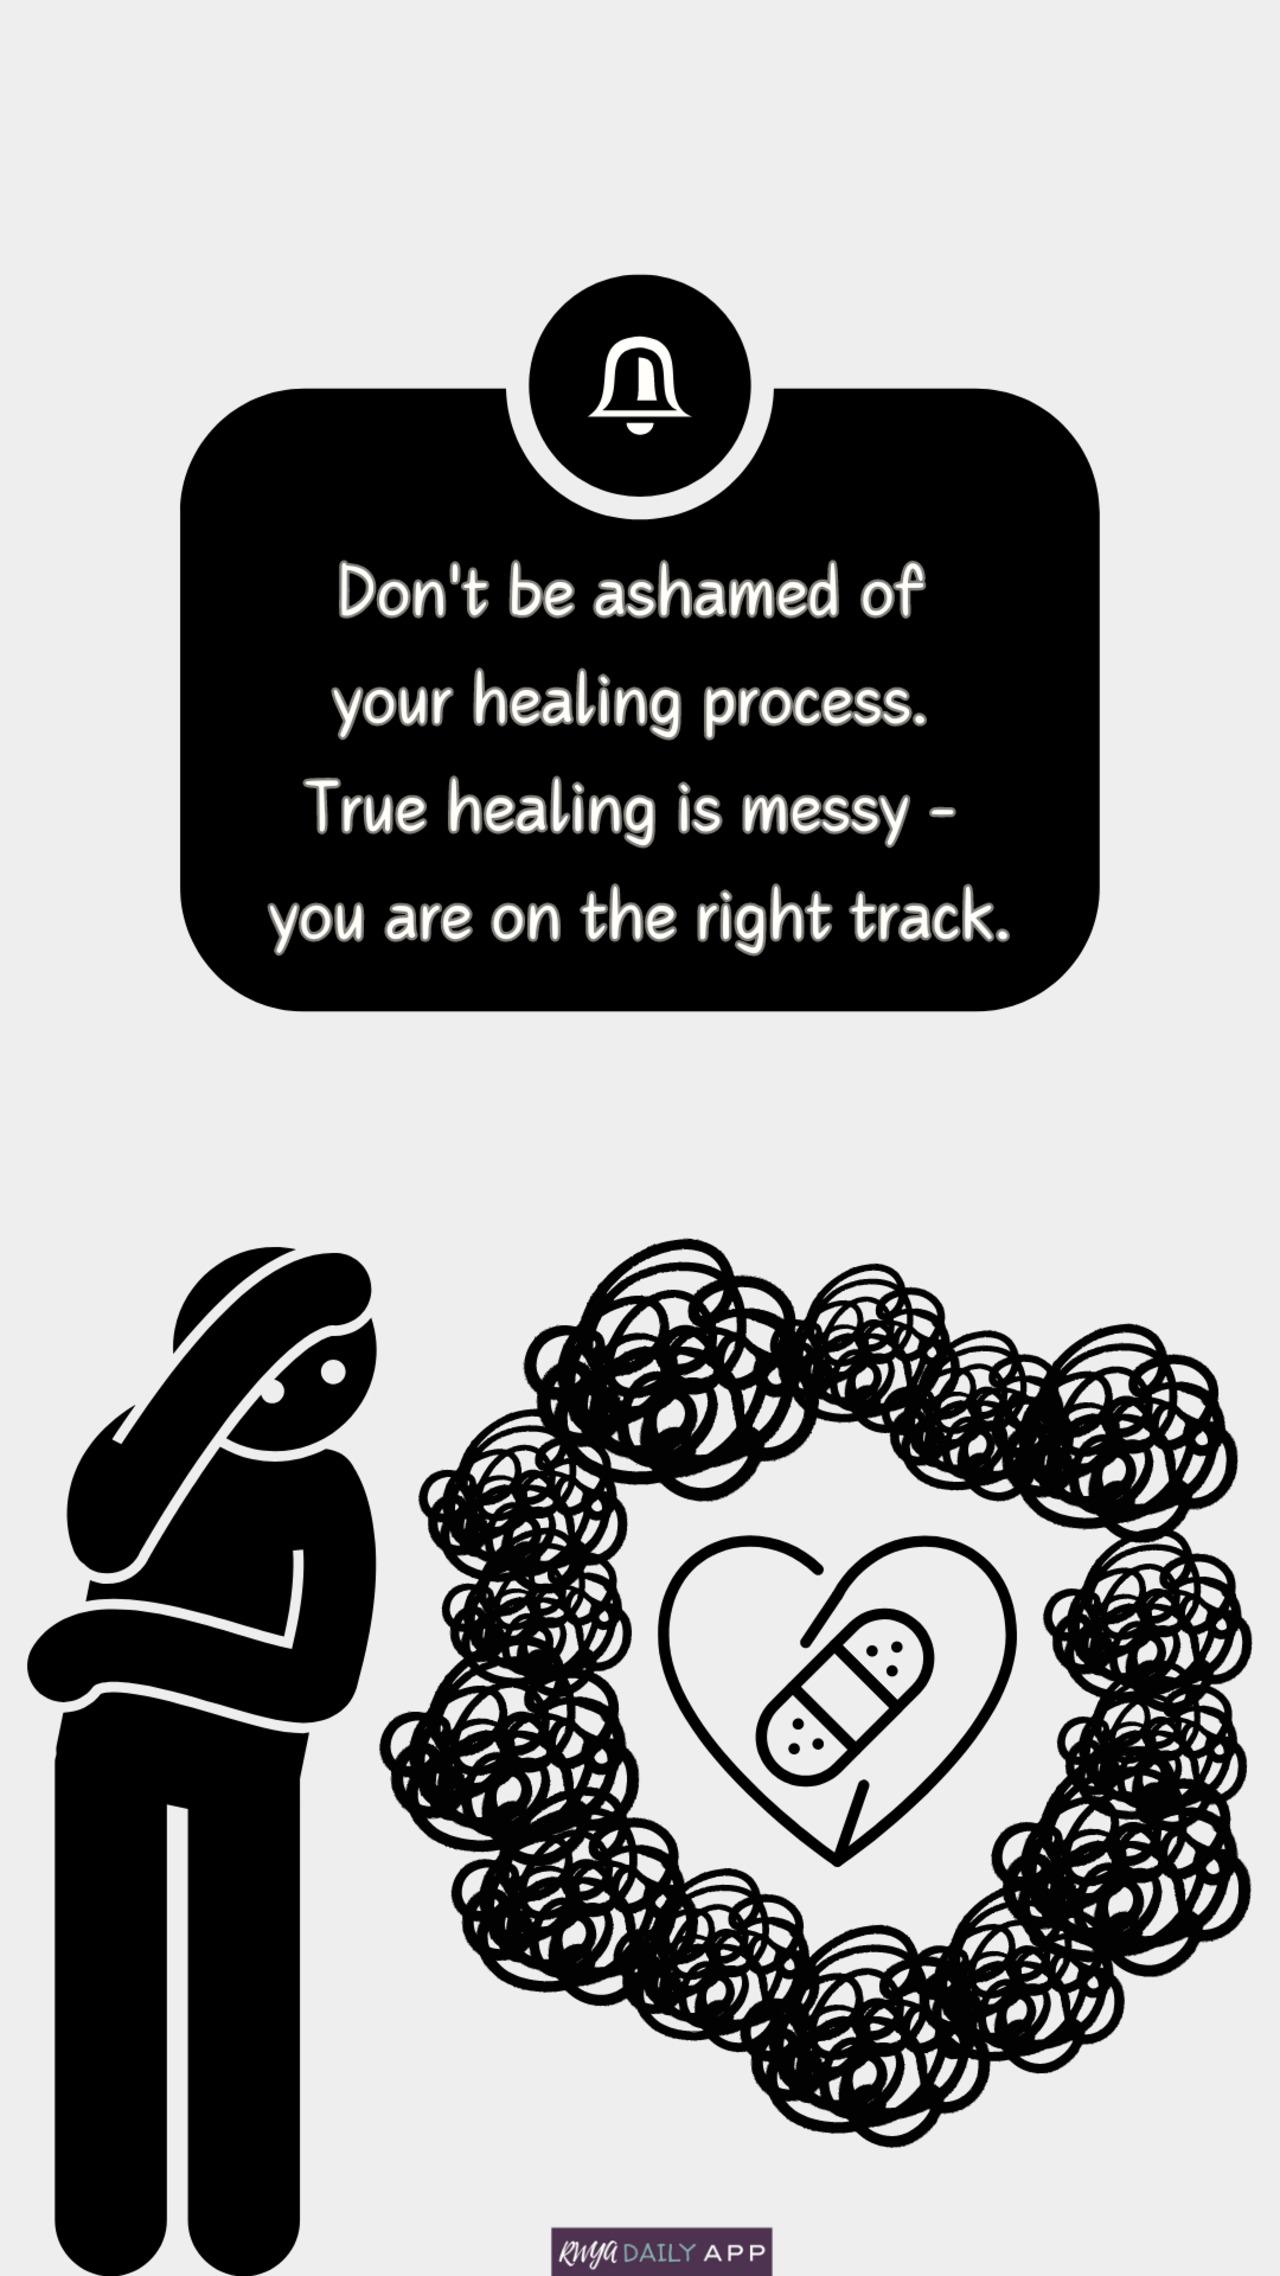 Don't be ashamed of your healing process. True healing is messy - you are on the right track. 